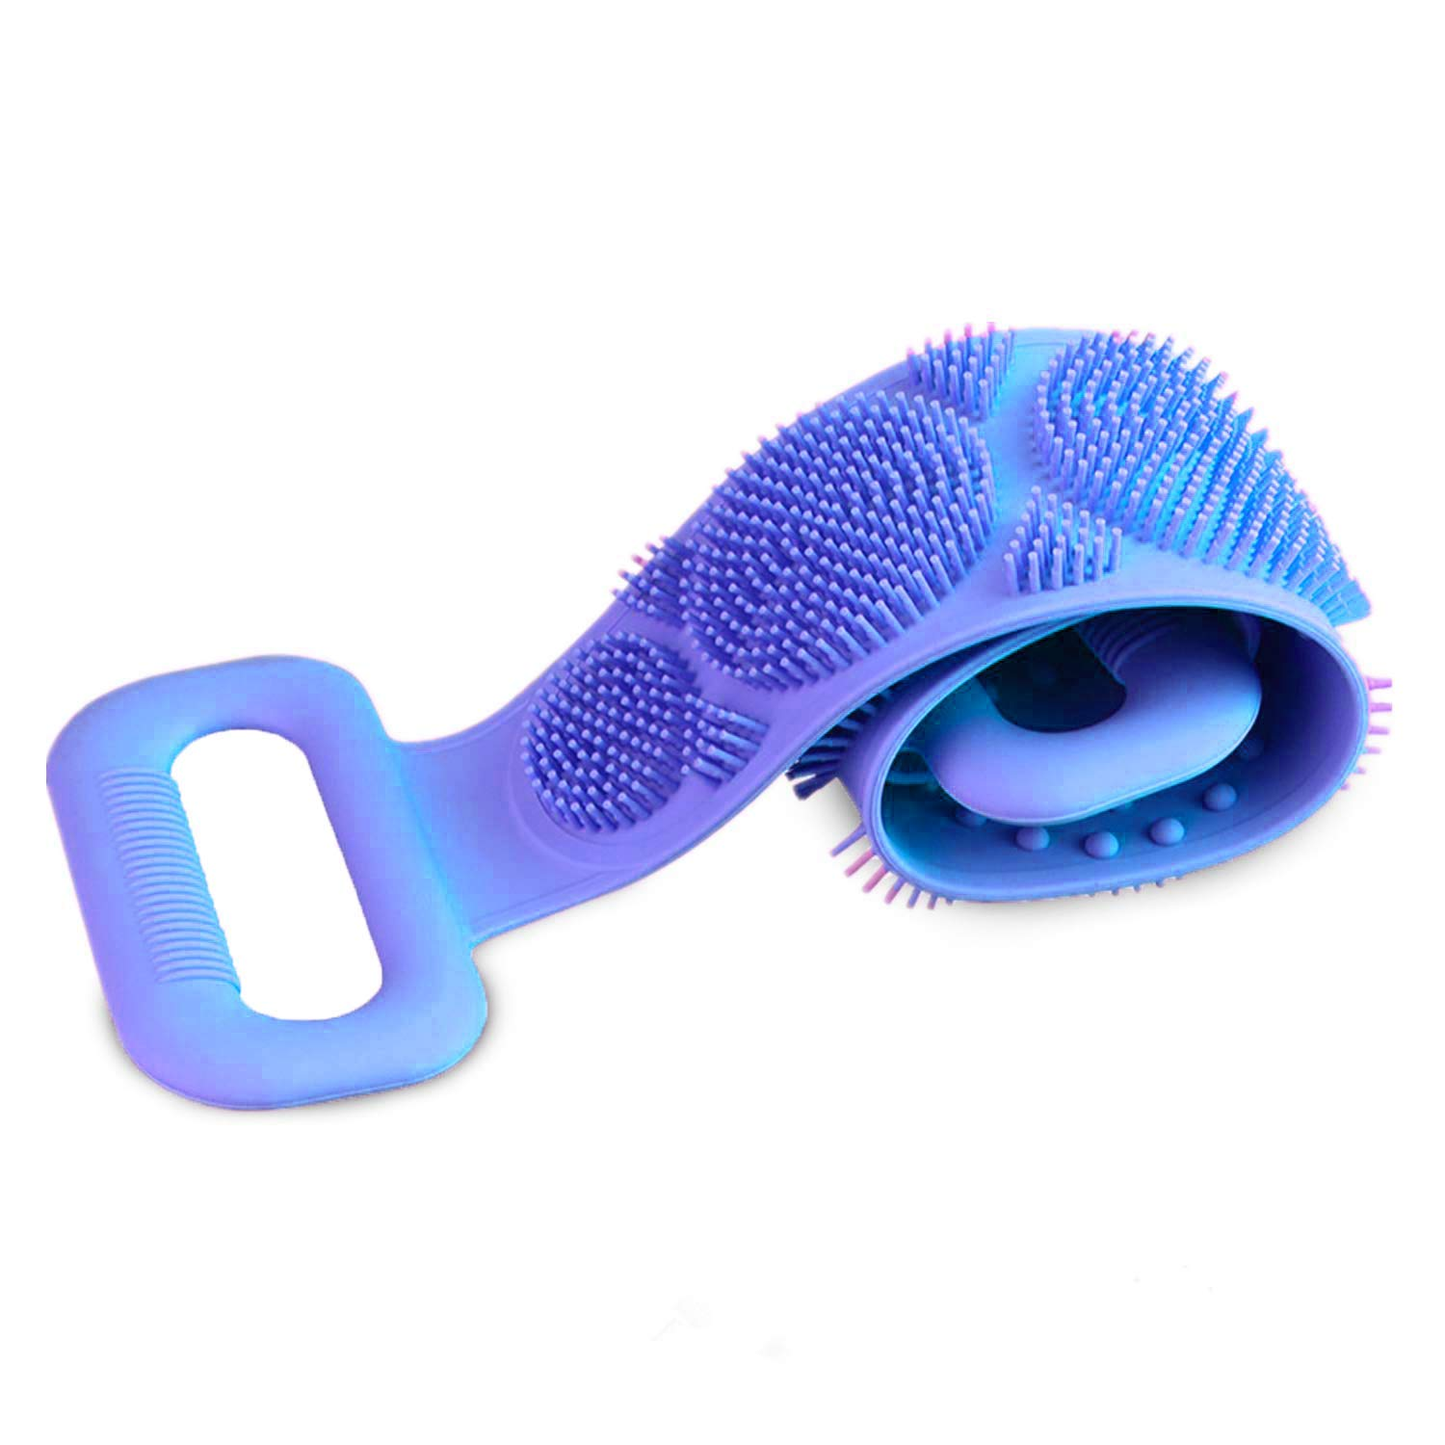 Silicone Back Scrubber for Shower, Back Scrubber for Shower for Men and Women, Deep Clean & Invigorate Your 